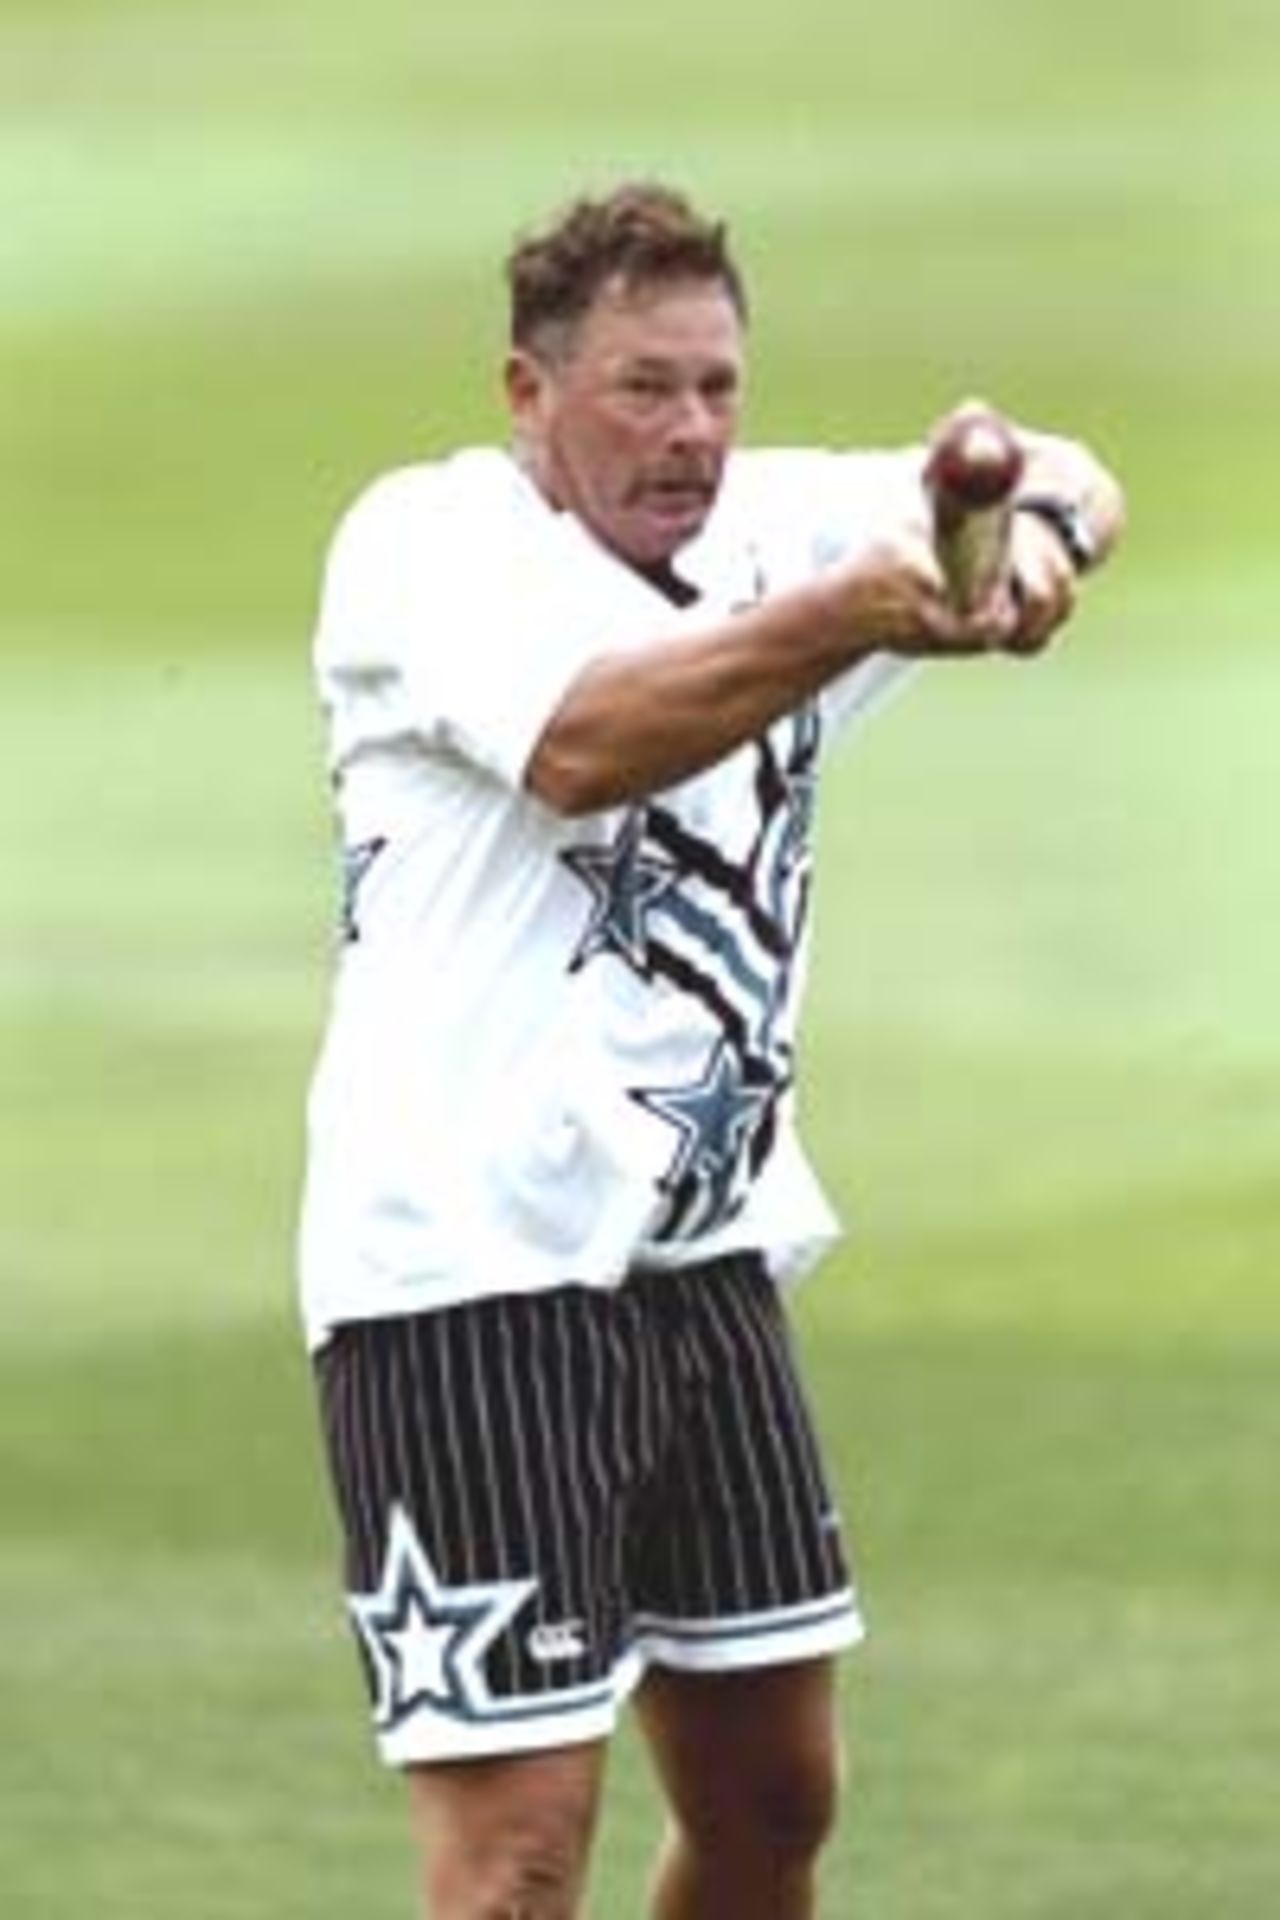 20 July 1999: Steve Rixon the New Zealand coach during a practice session before the Second Test against England played at Lords in London, England.